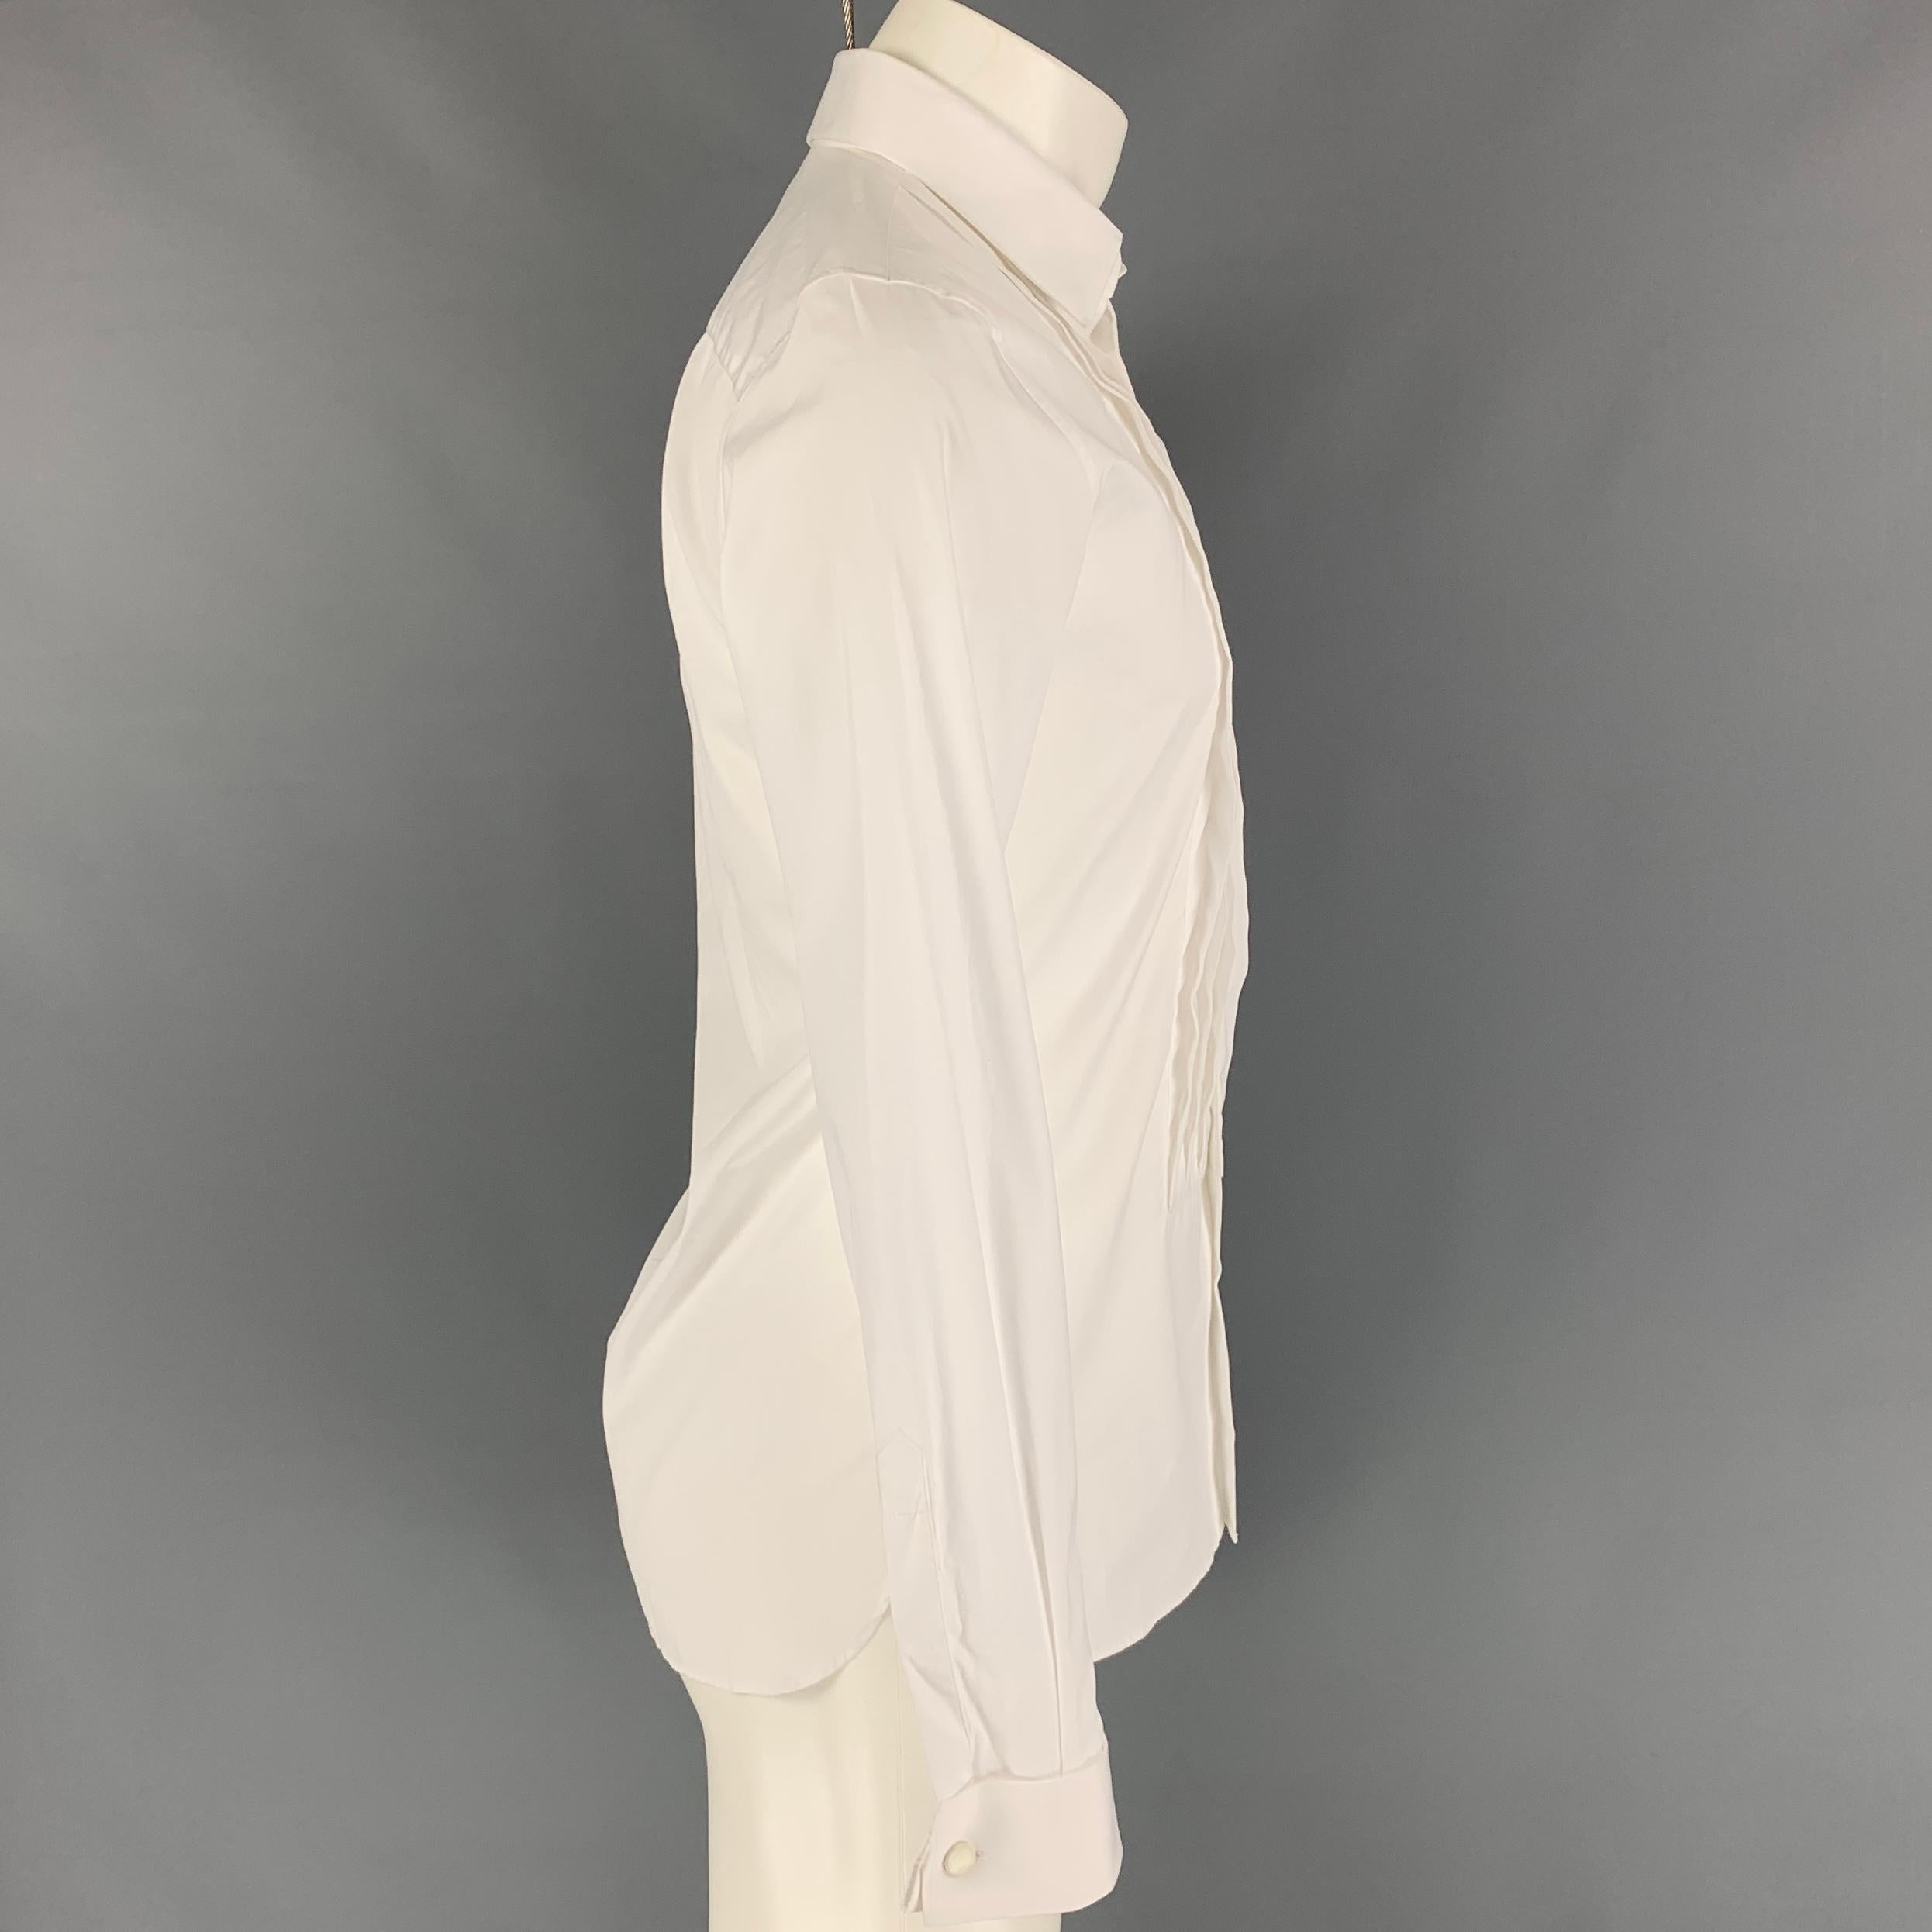 BURBERRY LONDON tuxedo long sleeve shirt comes in a white cotton featuring a slim fit, pleated front, french cuffs, spread collar, and a hidden button closure. 

Very Good Pre-Owned Condition.
Marked: 15/38

Measurements:

Shoulder: 17.5 in.
Chest: